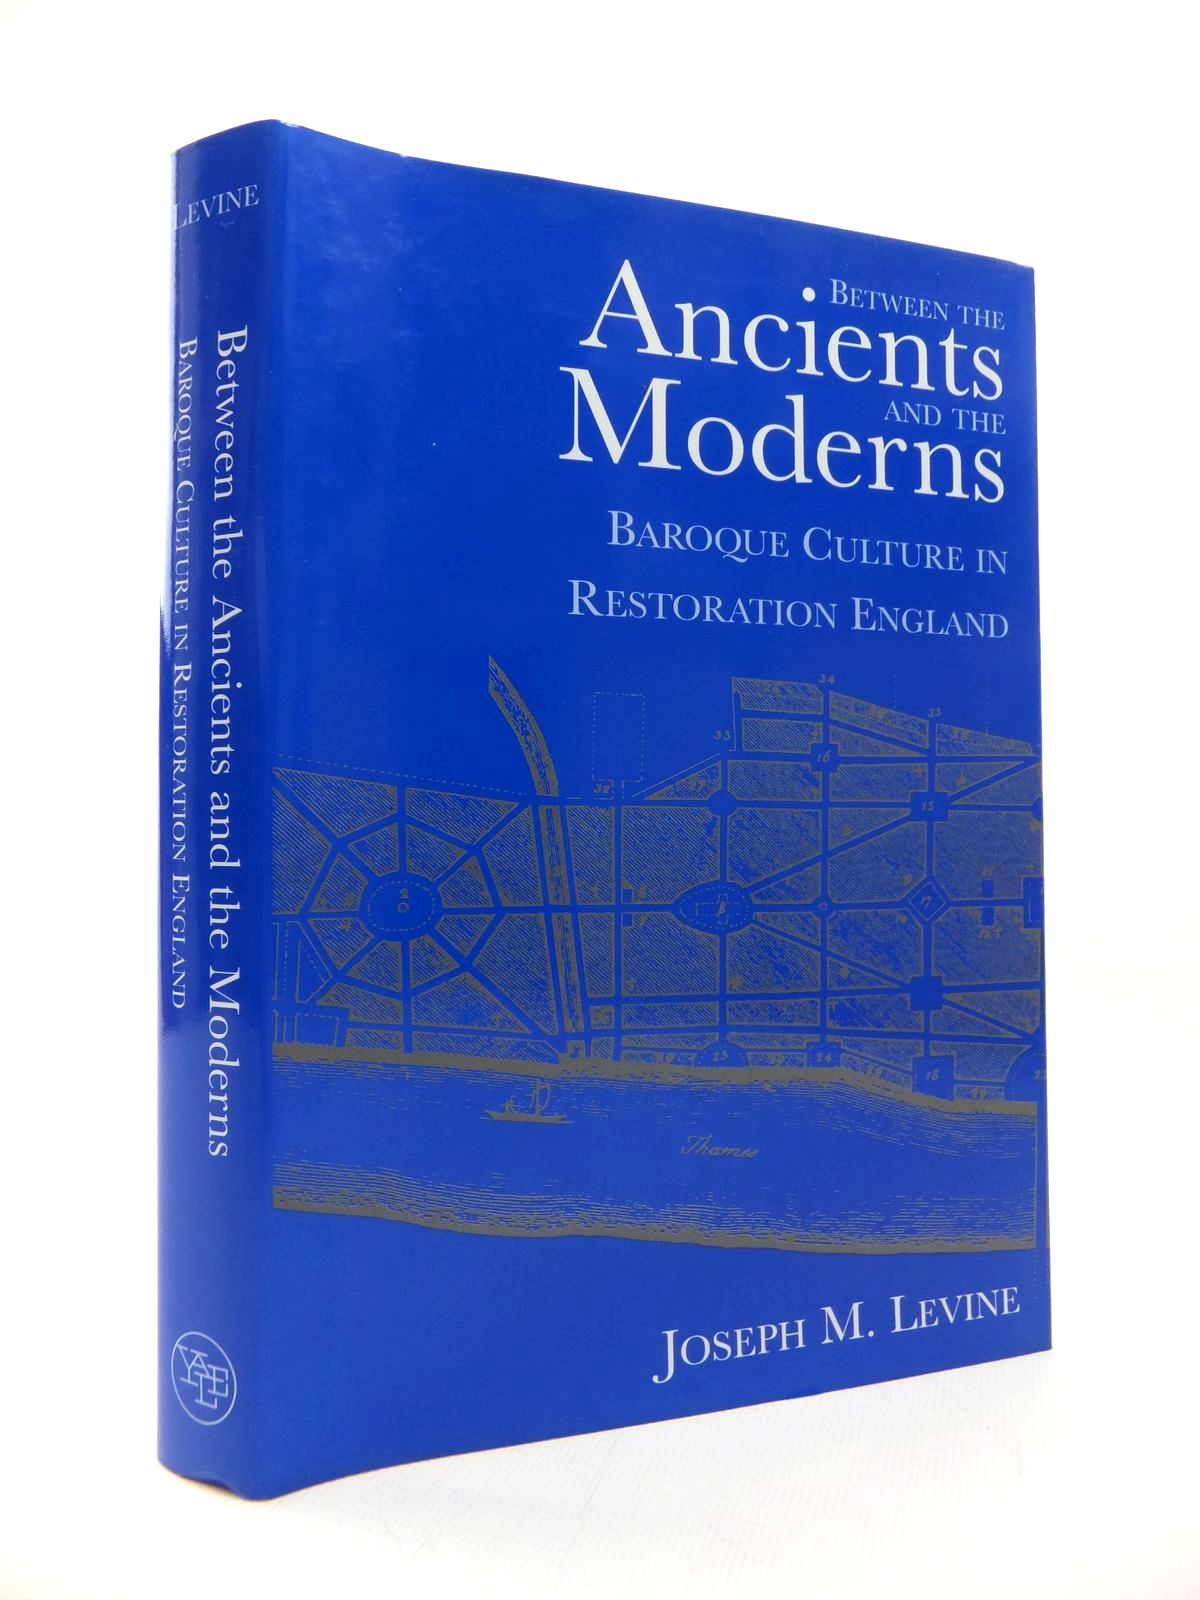 Photo of BETWEEN THE ANCIENTS AND THE MODERNS: BAROQUE CULTURE IN RESTORATION ENGLAND written by Levine, Joseph M. published by Yale University Press (STOCK CODE: 1814566)  for sale by Stella & Rose's Books